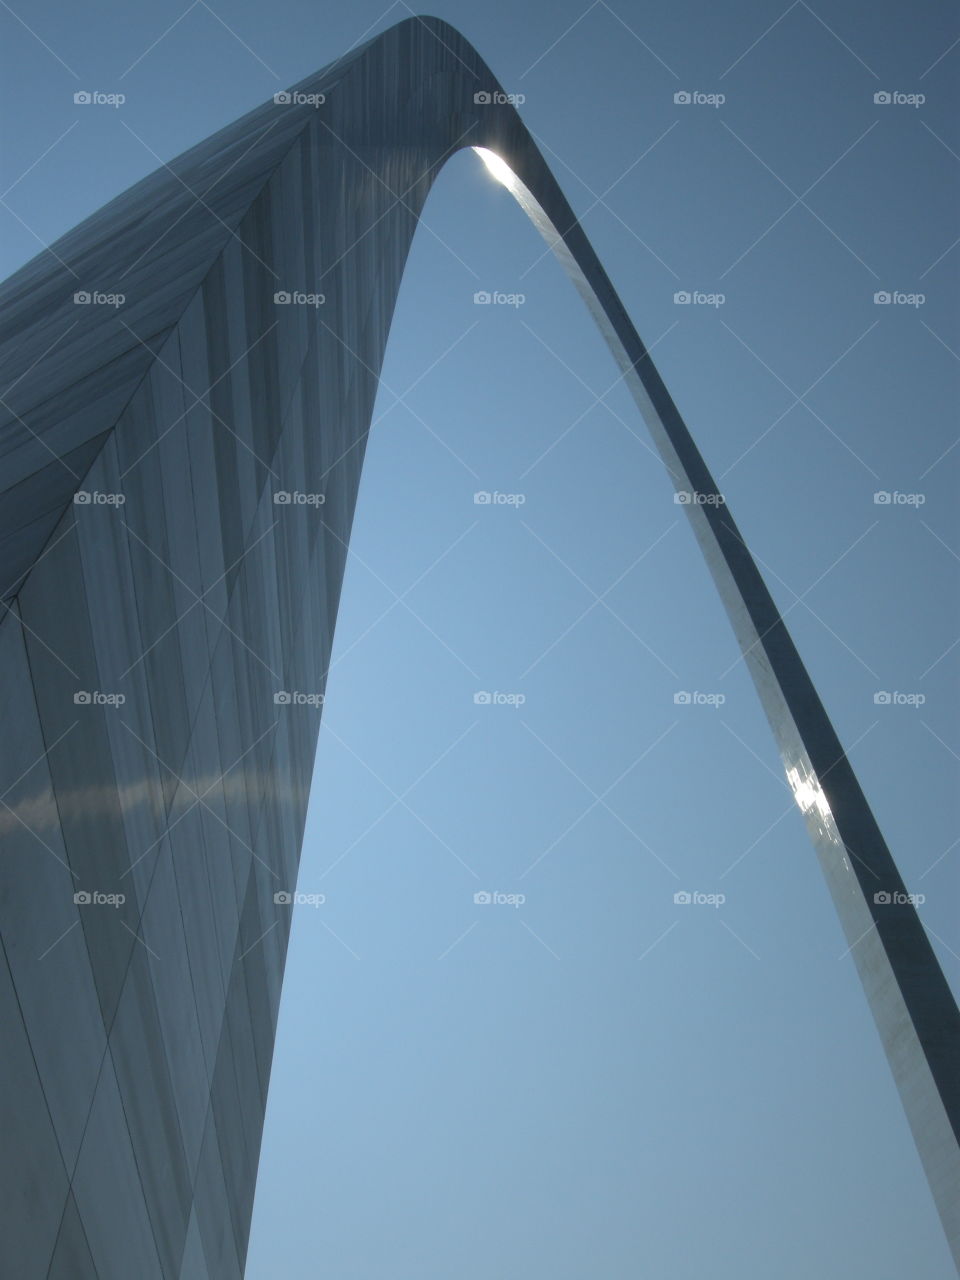 The afternoon sun glints on the stainless steel skin of the Gateway Arch in St. Louis